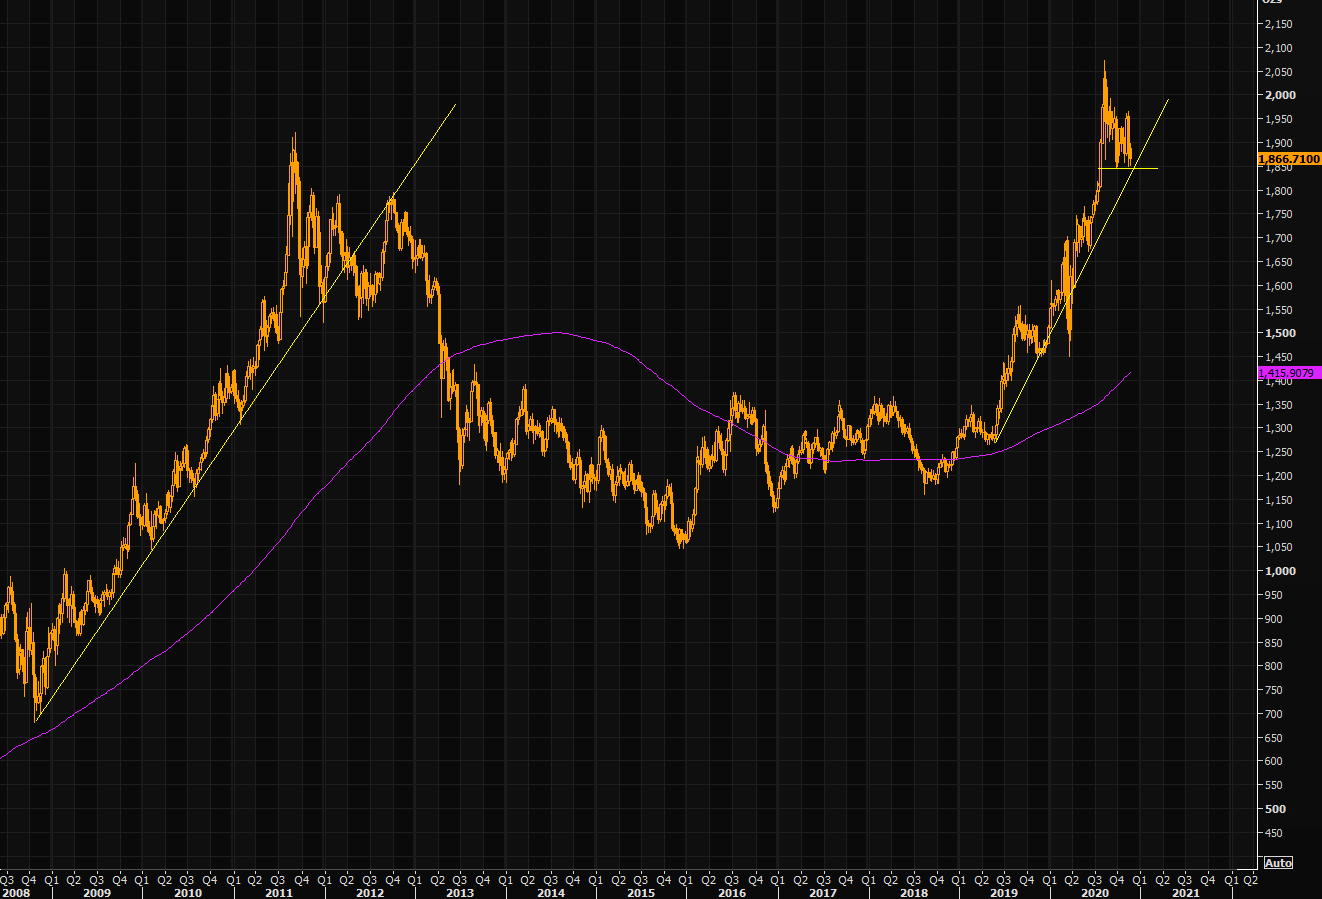 Gold - the longer term view